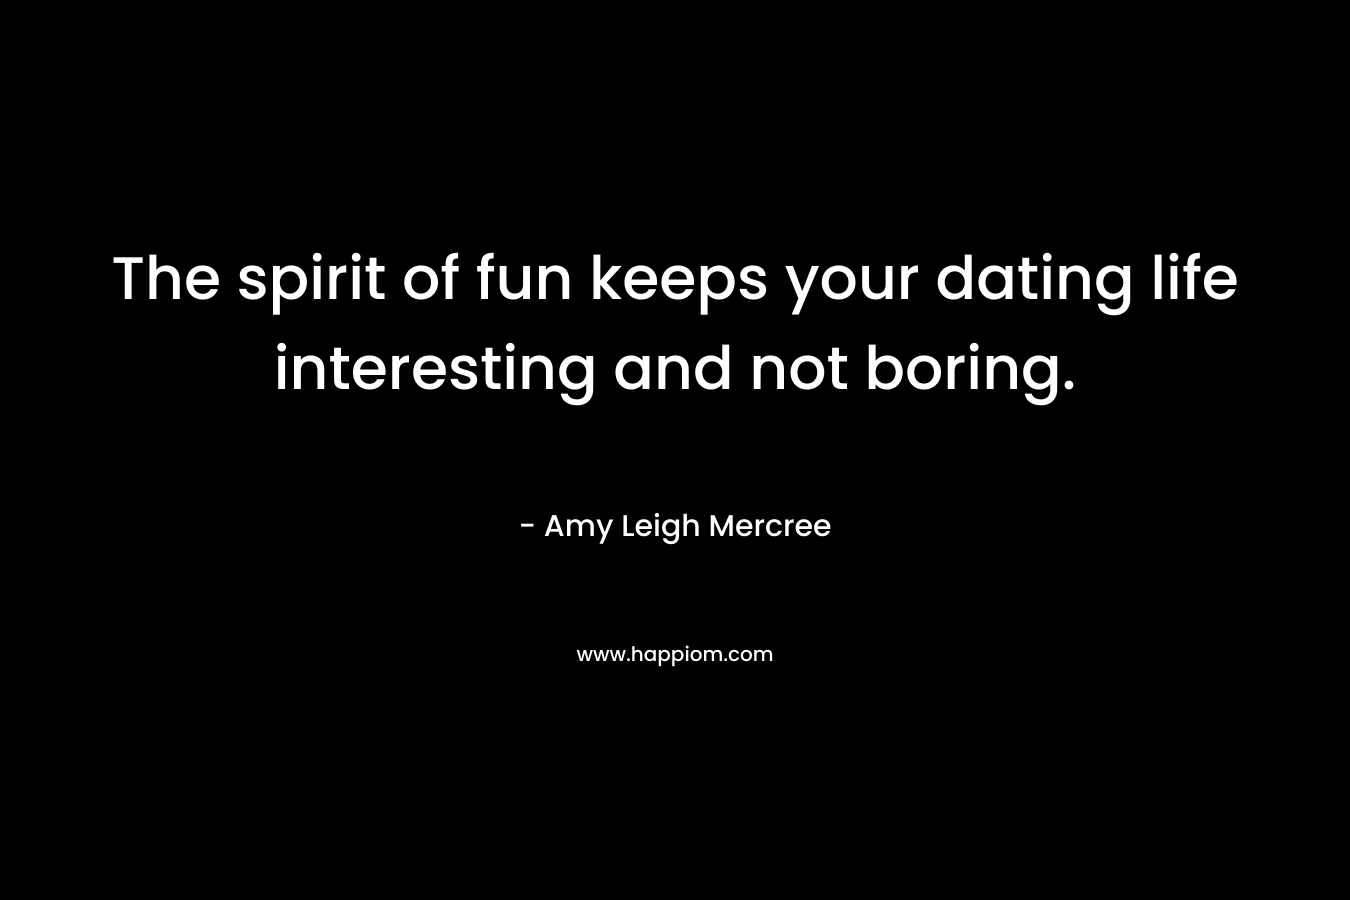 The spirit of fun keeps your dating life interesting and not boring. – Amy Leigh Mercree